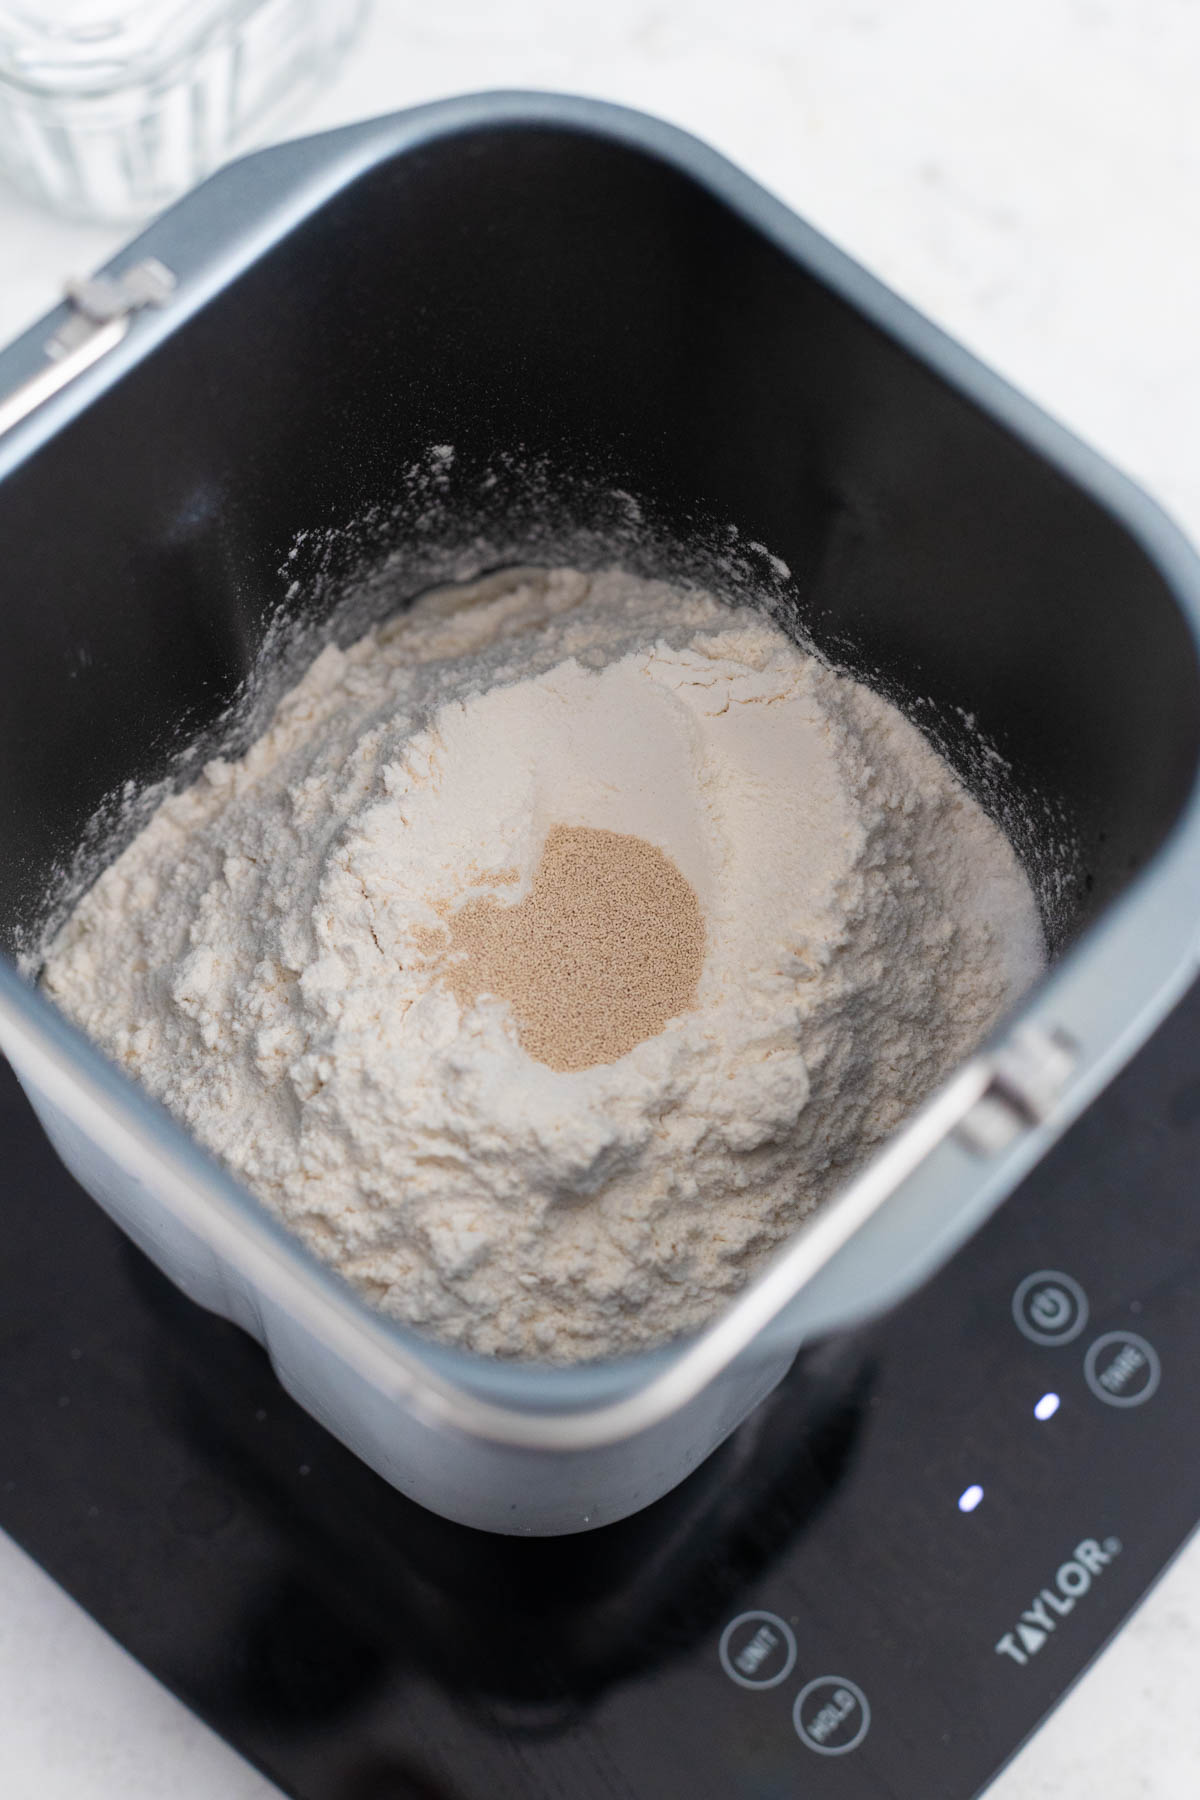 The flour and yeast are in the bread maker pan.